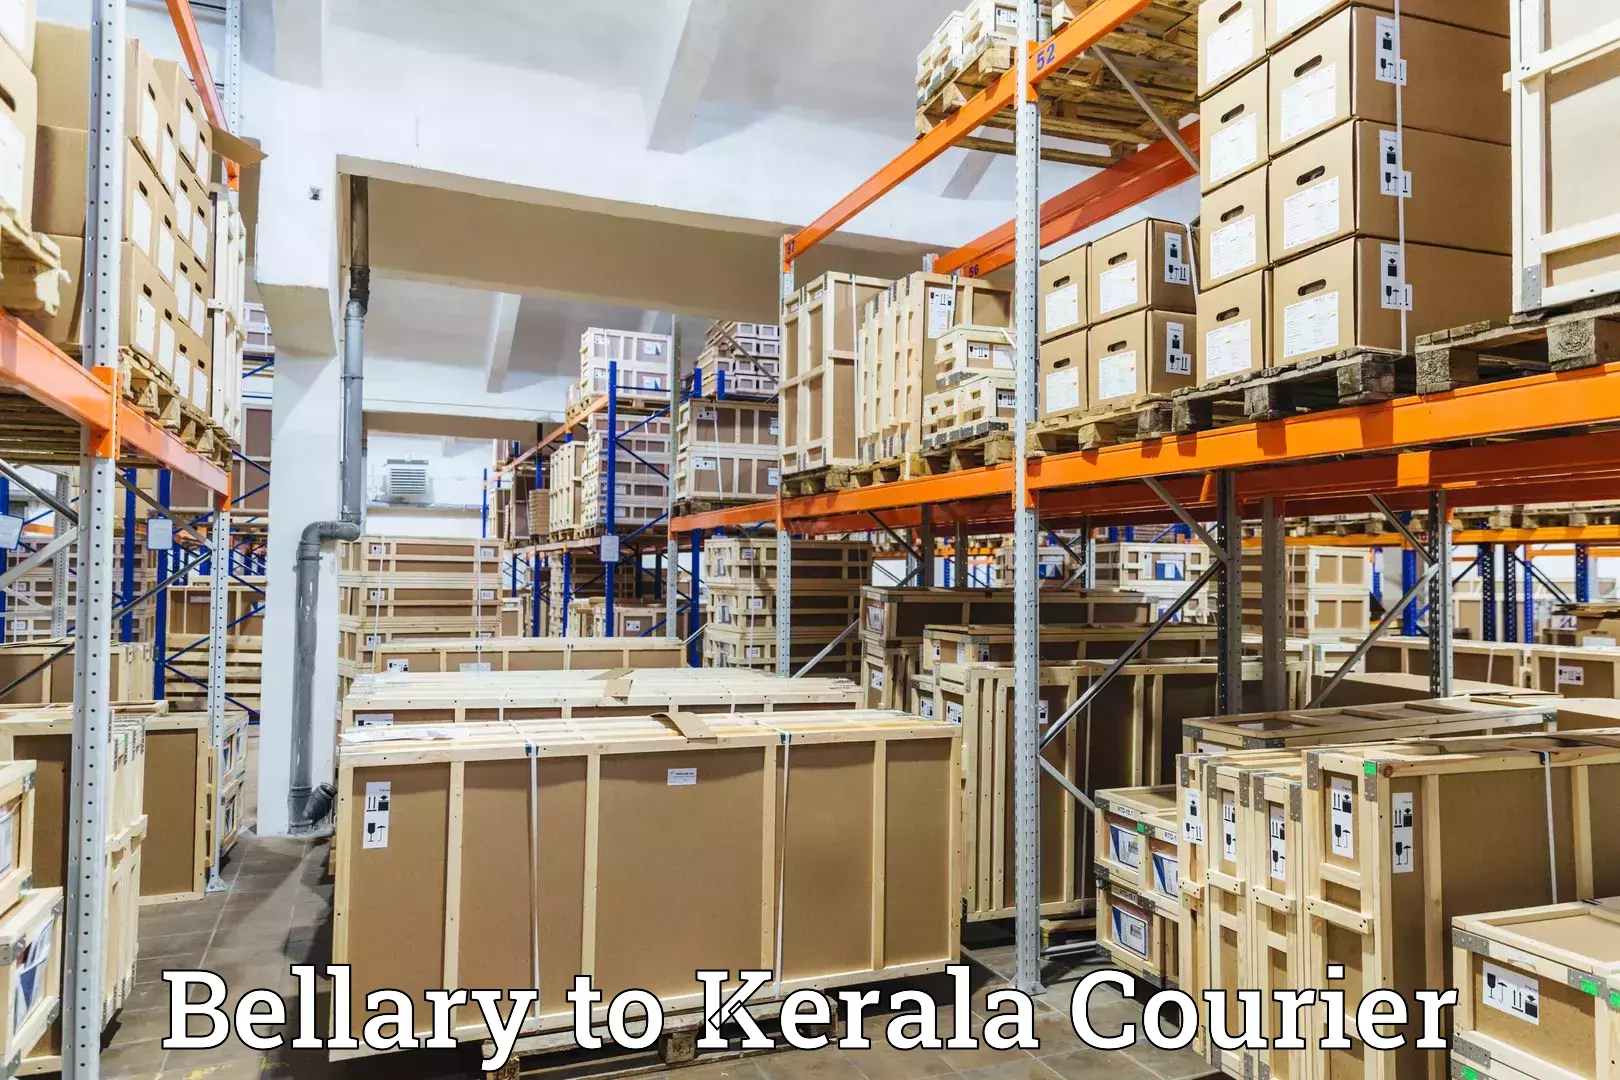 Residential courier service in Bellary to Kerala